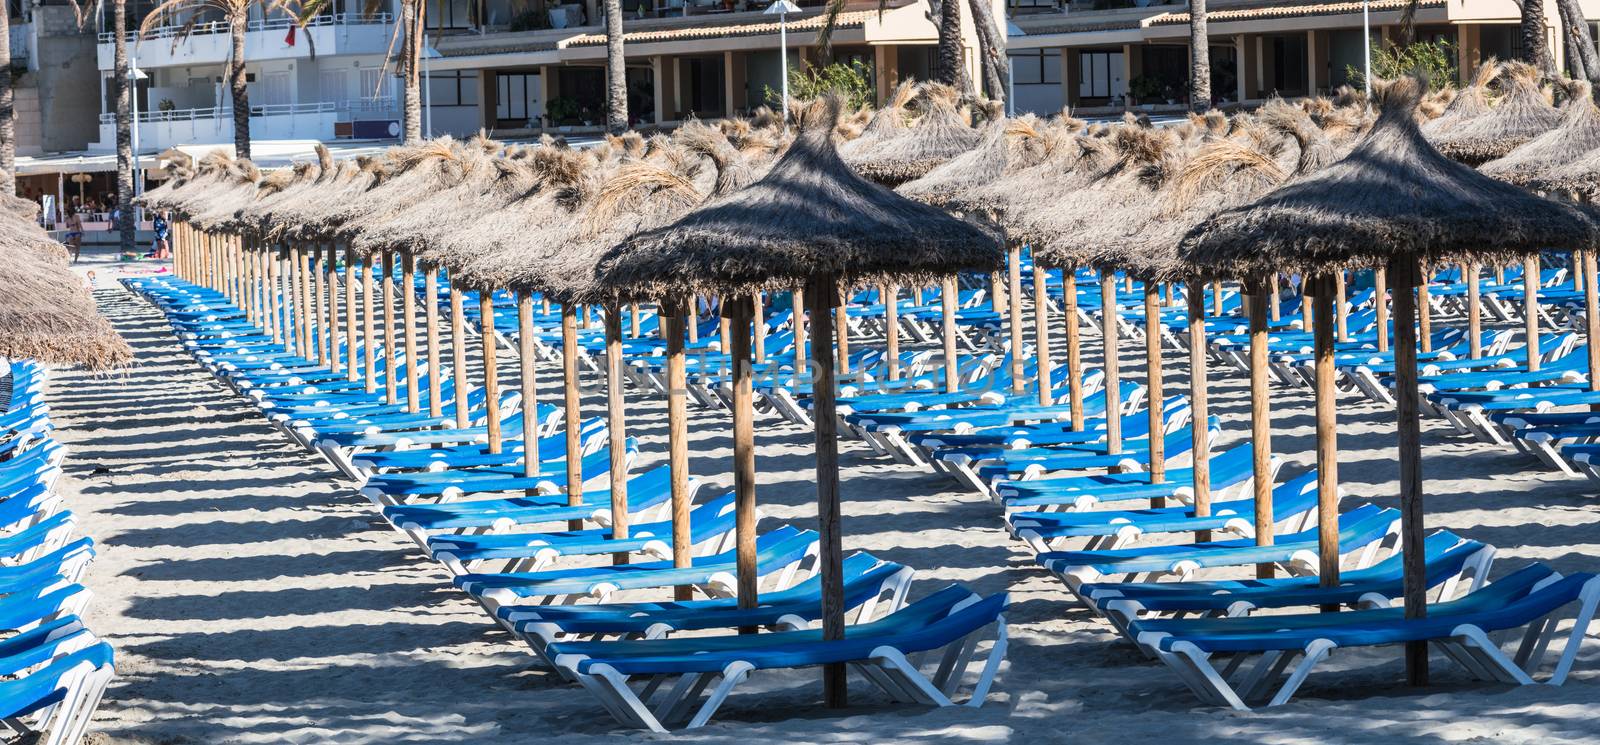 Umbrellas and sun loungers in a row      by JFsPic